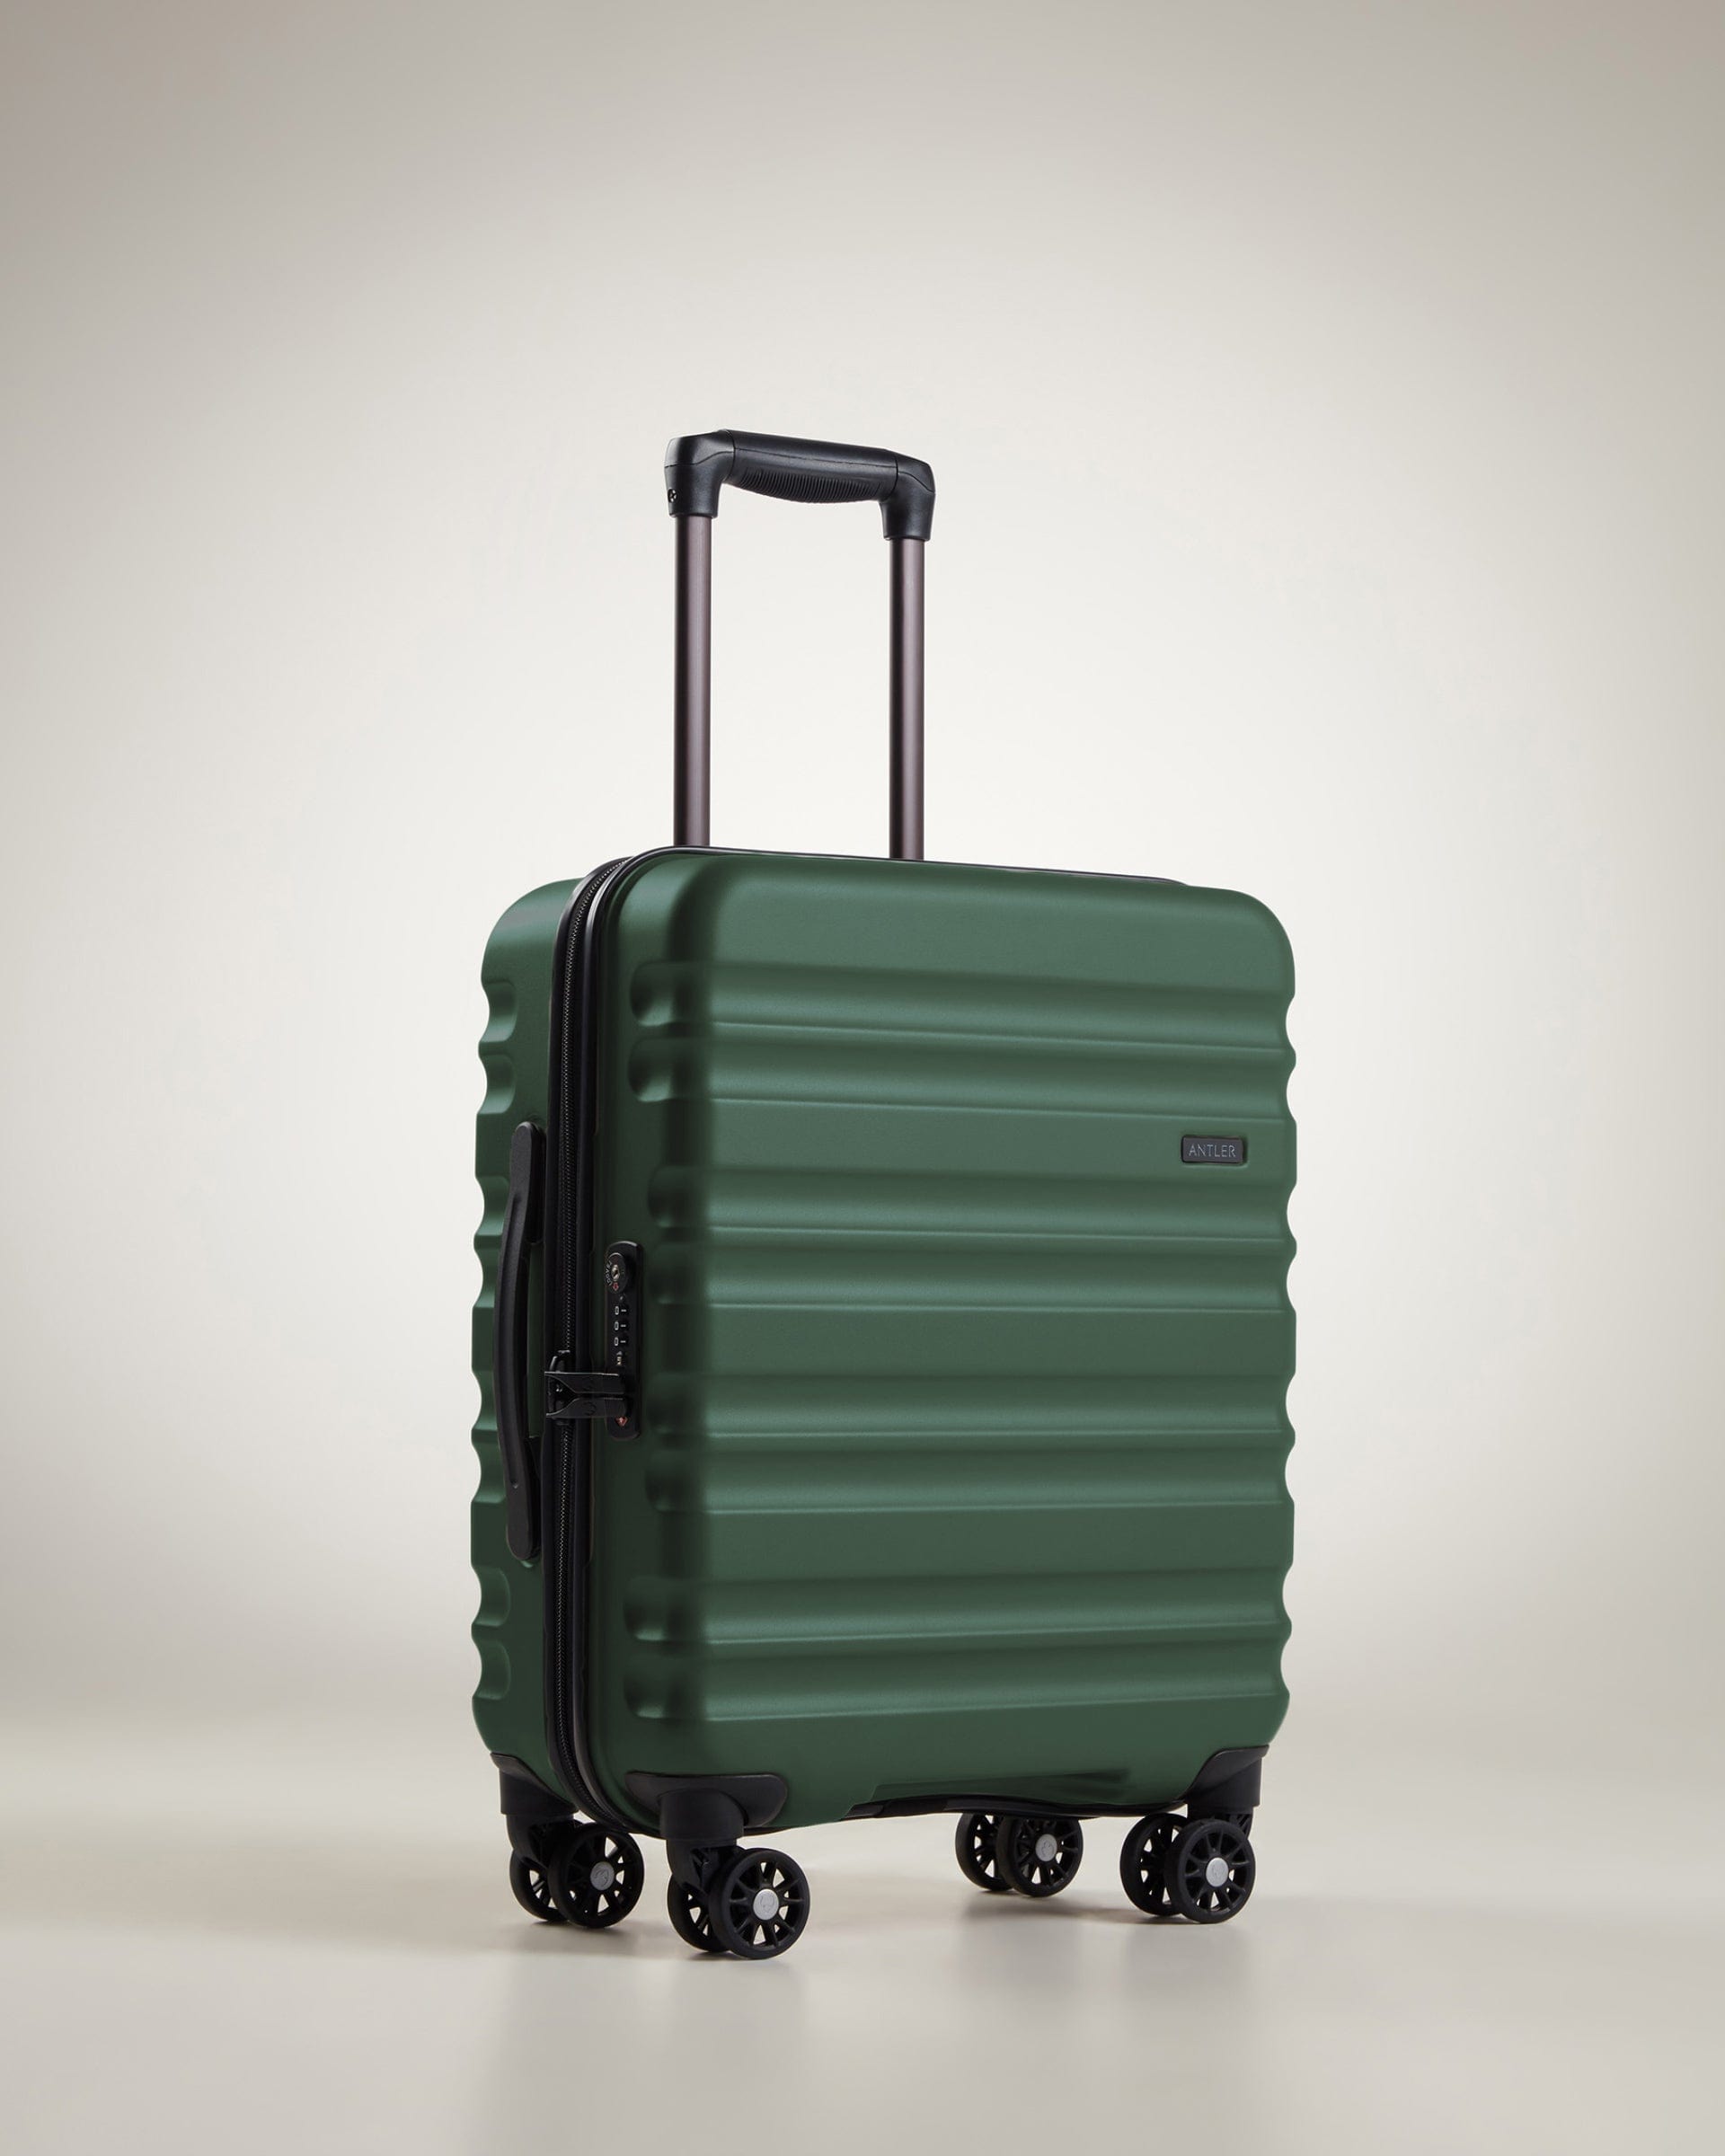 View Antler Clifton Cabin Suitcase In Woodland Green Size 20 x 40 x 55 cm information